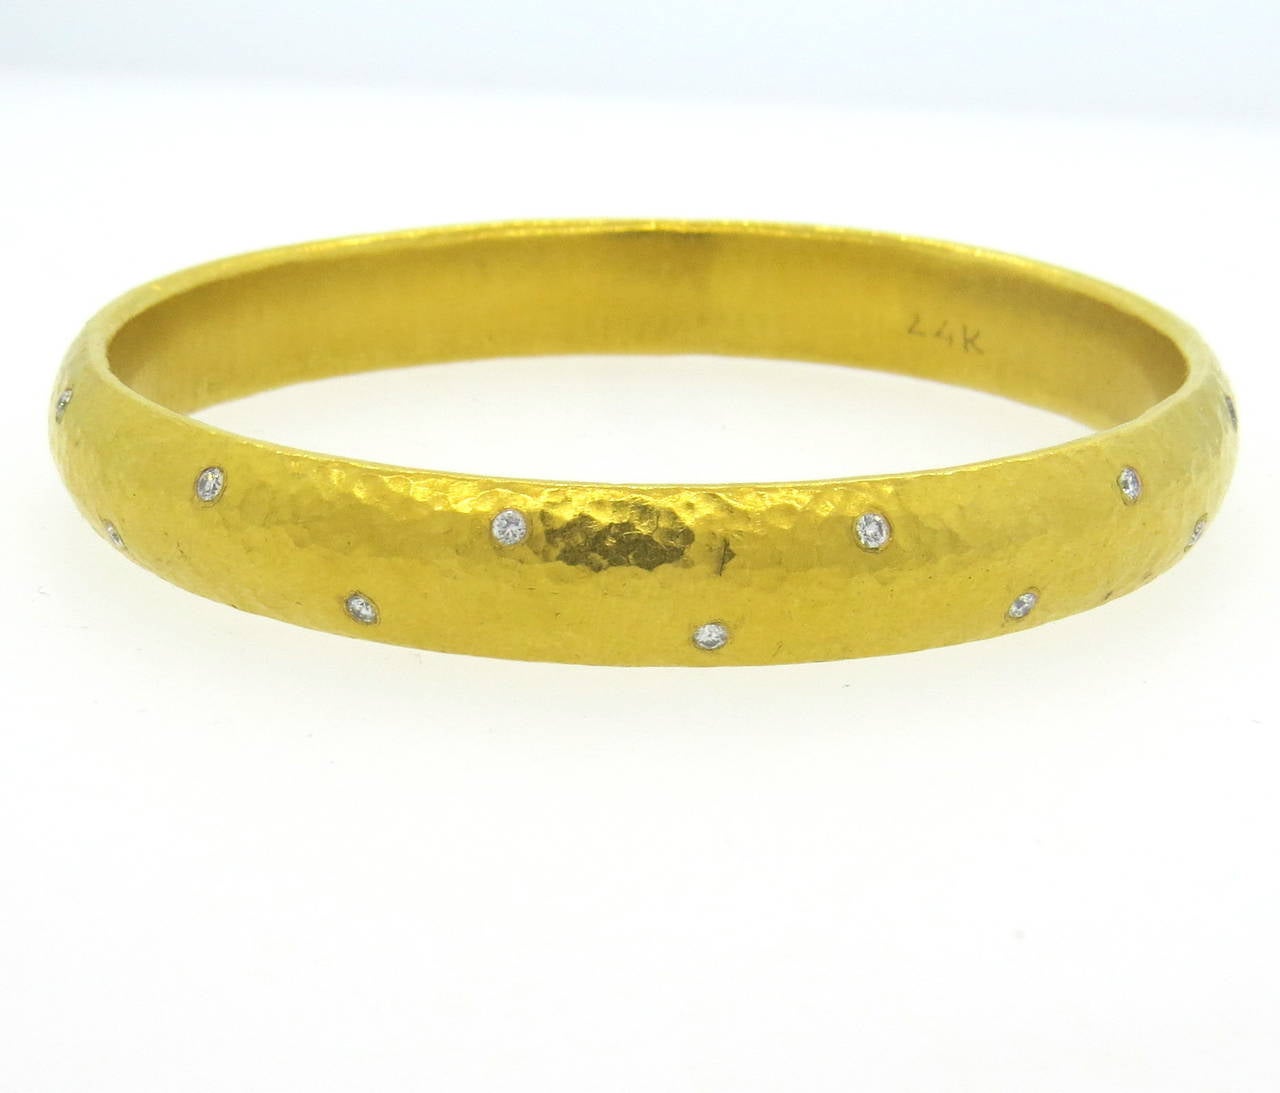 A 24k yellow gold bangle bracelet set with approximately 0.70cts in G/VS diamonds.  The bangle has a diameter of 64mm and is 10mm wide.  The weight of the bracelet is 39.5 grams.